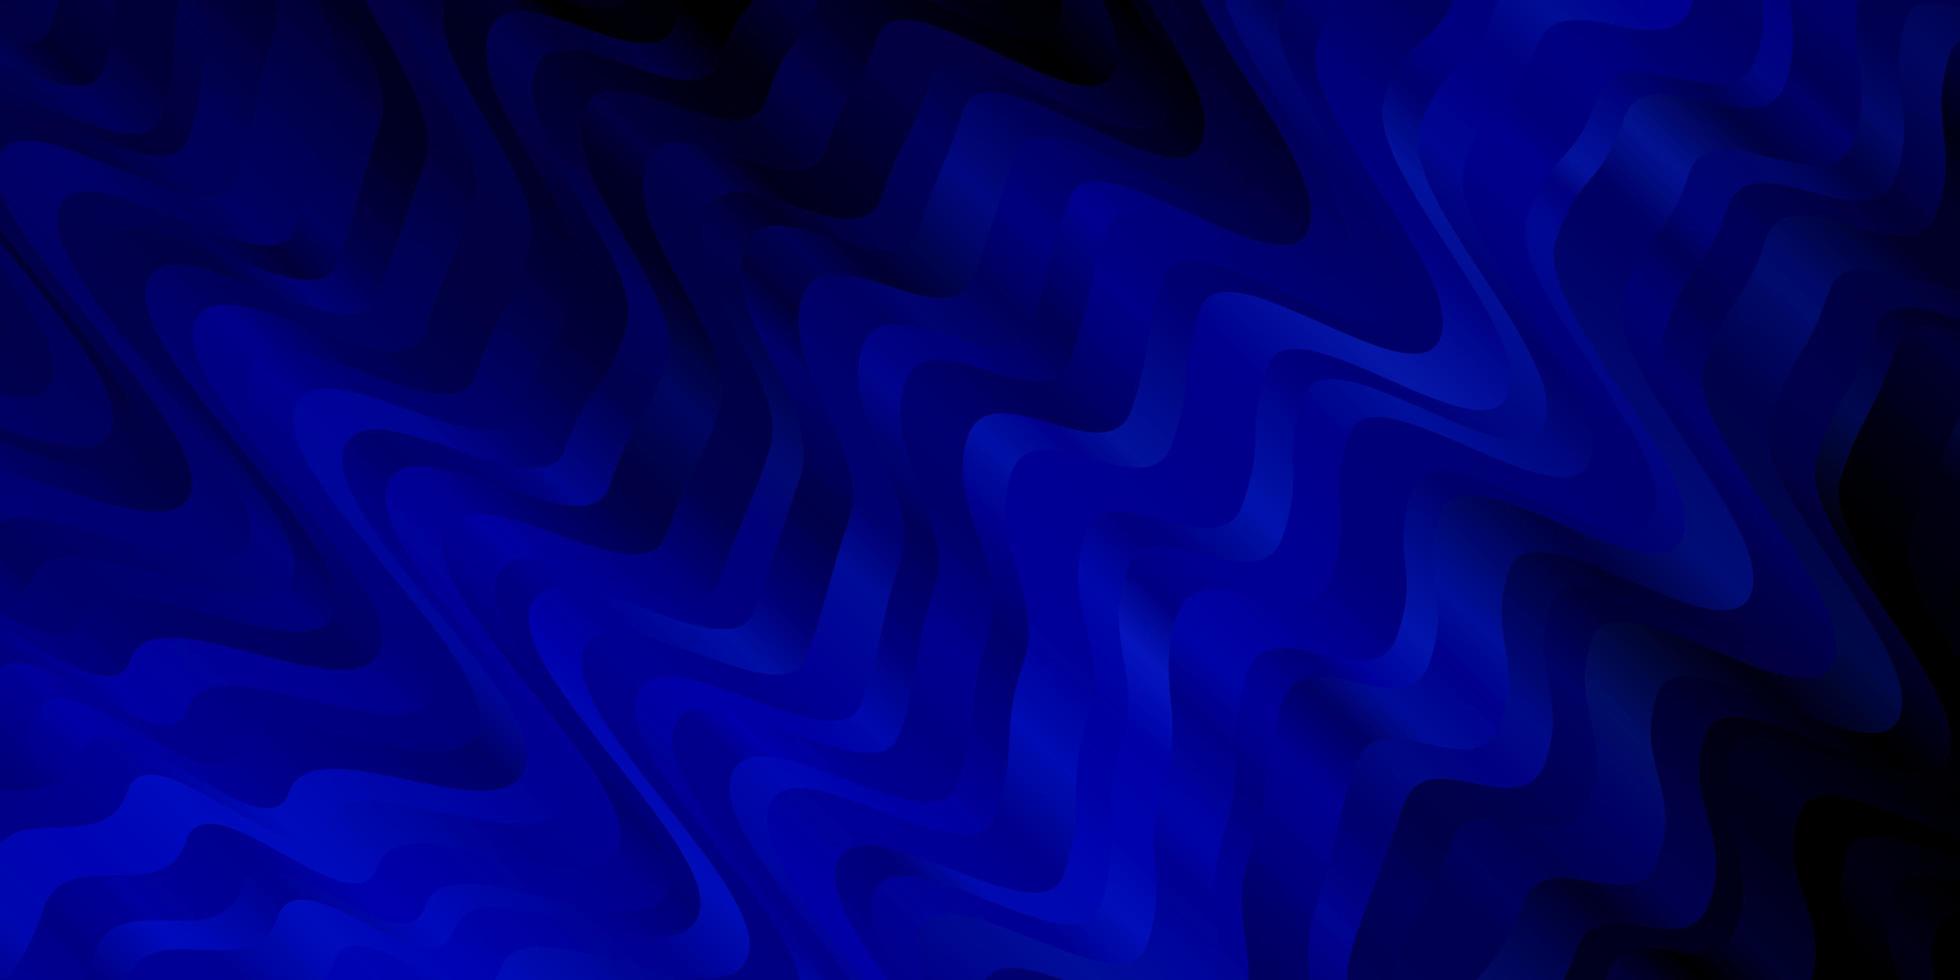 Dark BLUE vector pattern with wry lines